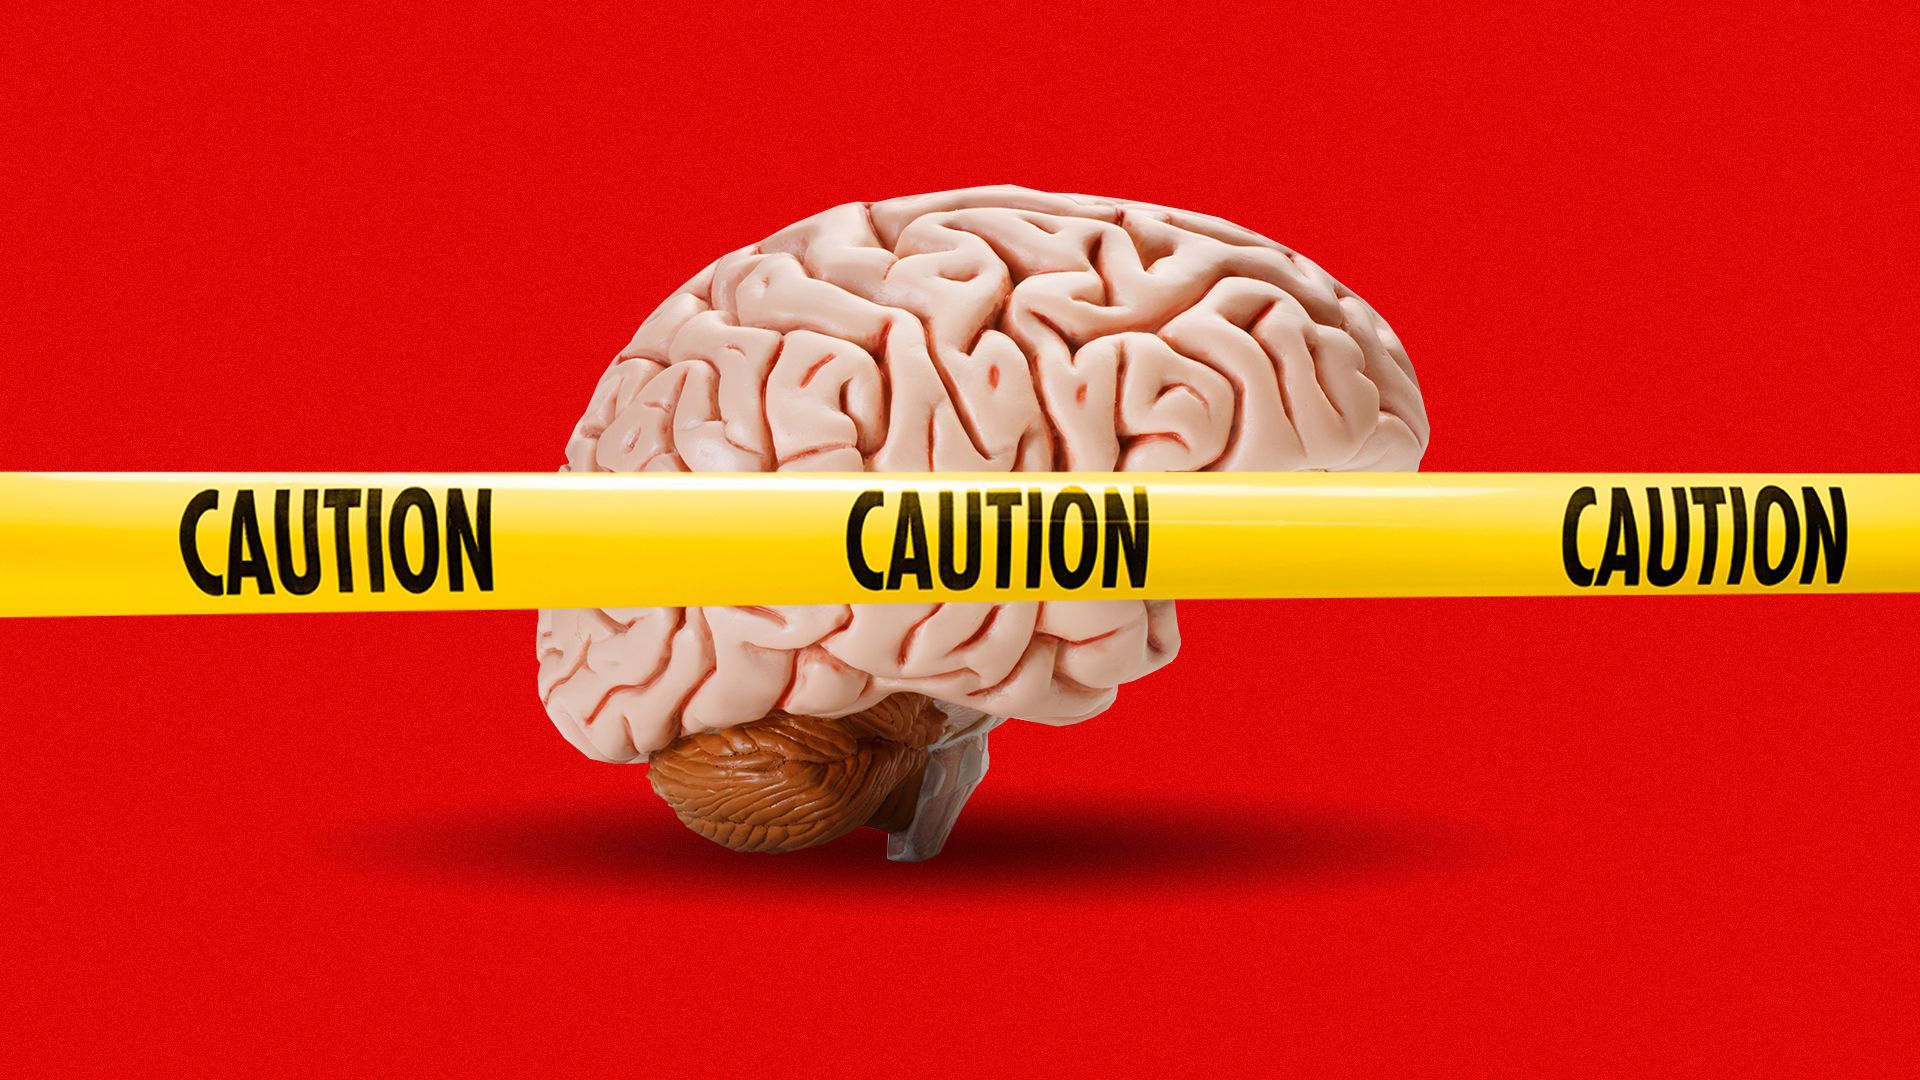 Illustration of a brain behind caution tape